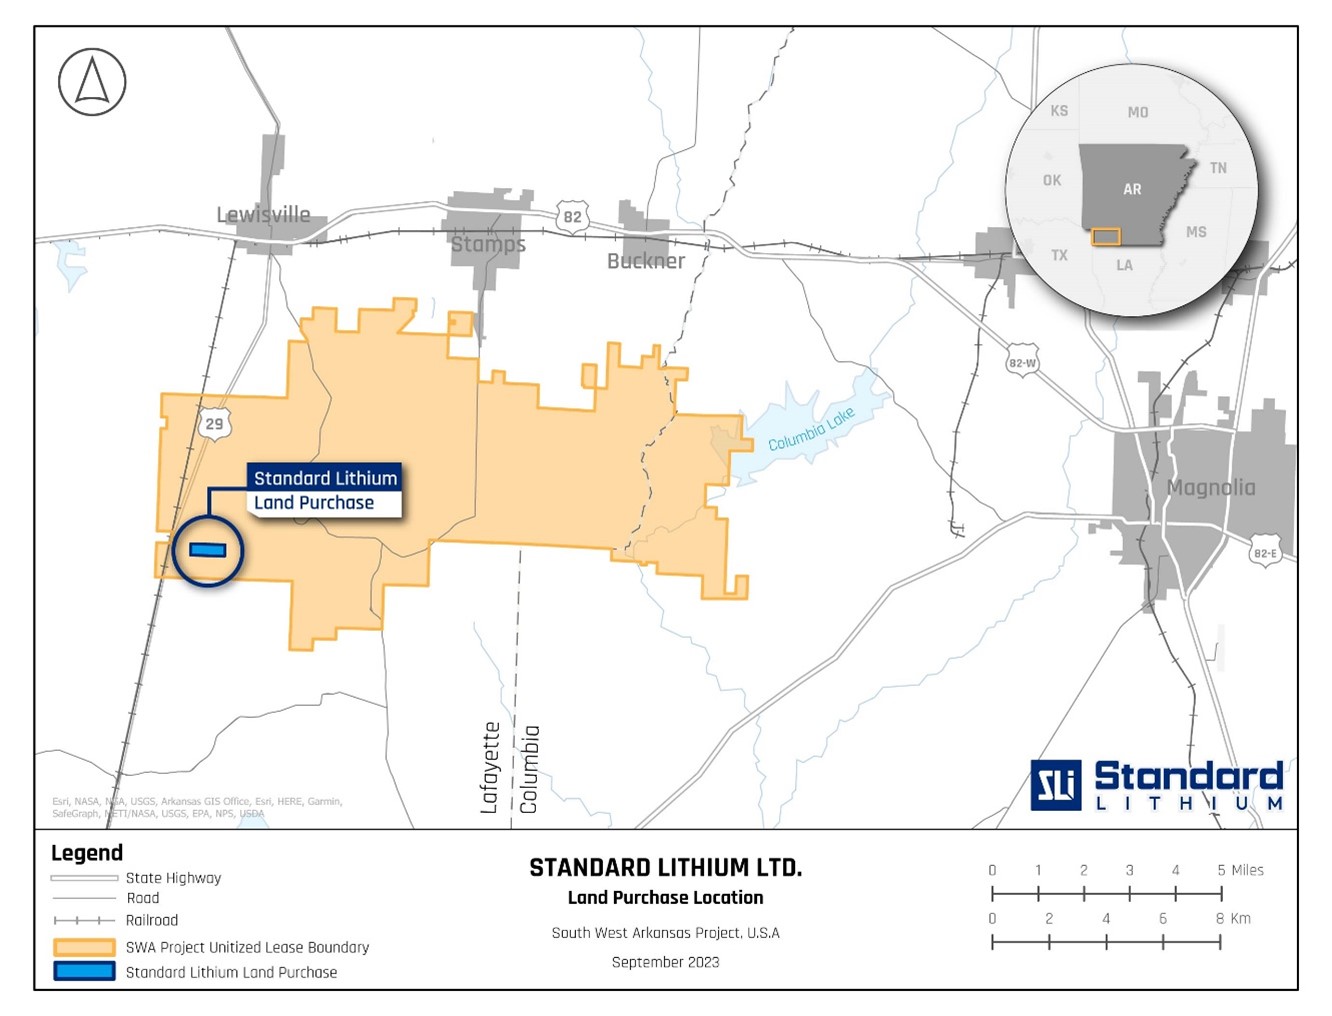 Overview of South West Arkansas Project and Land Purchase